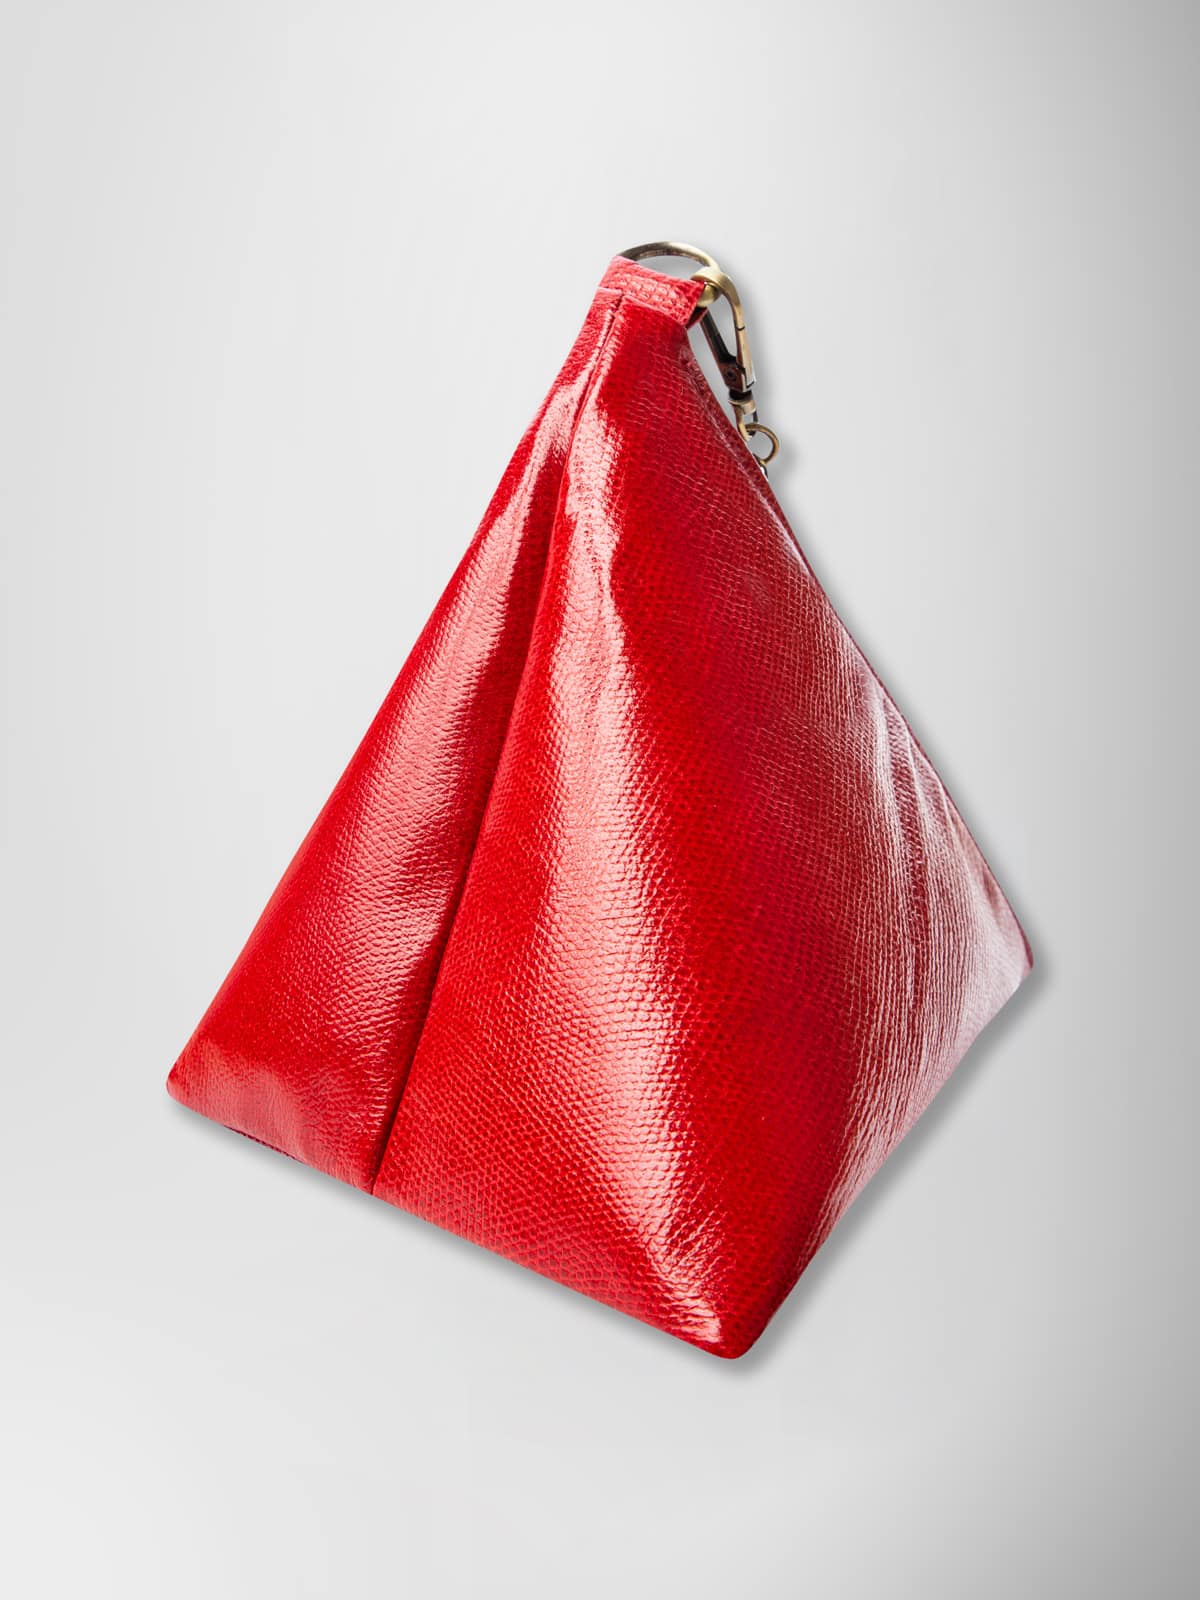 TEA BAG LEATHER & CHAIN RED